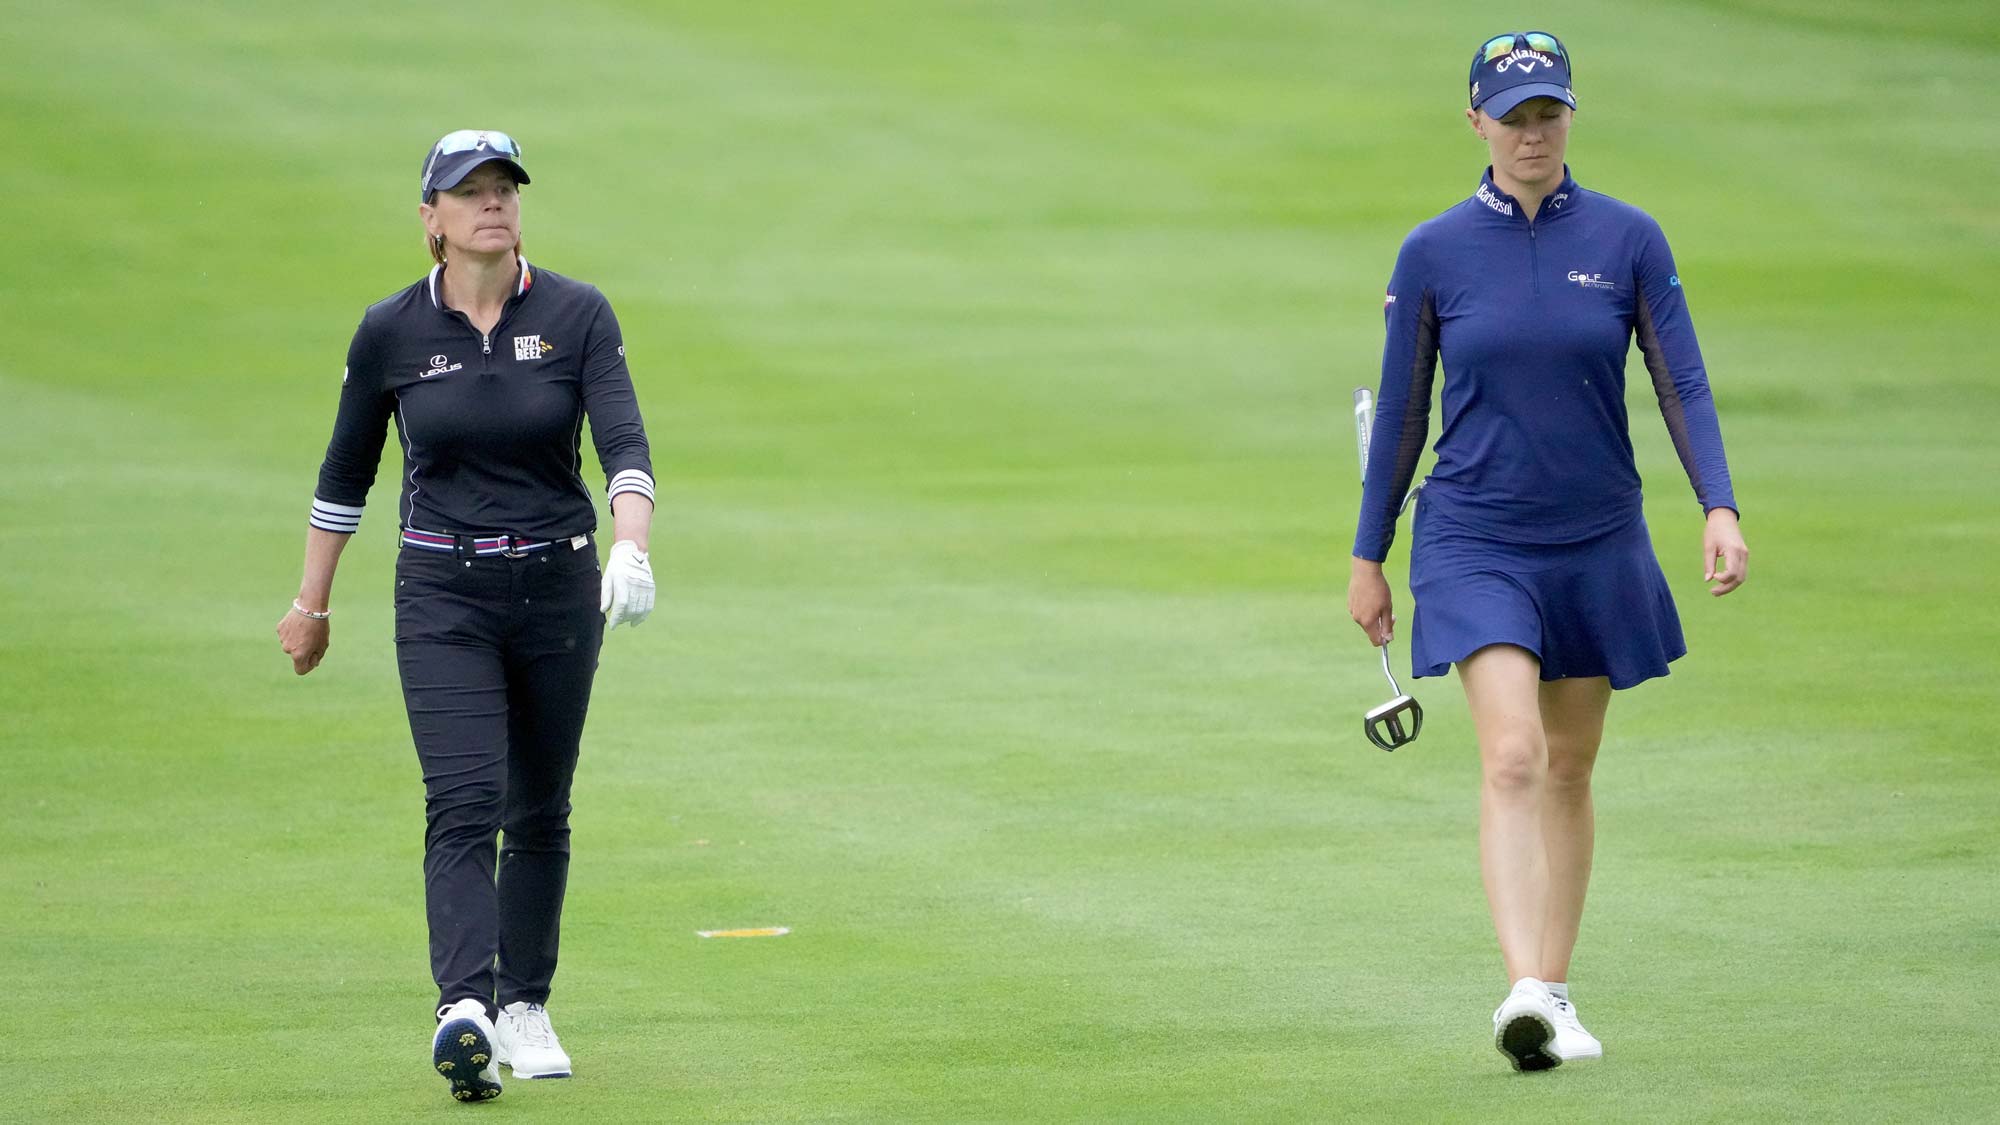 Annika Sorenstam of Sweden (L) and Madelene Sagstrom of Sweden walk across the eighth hole during the first round of the Dow Great Lakes Bay Invitational